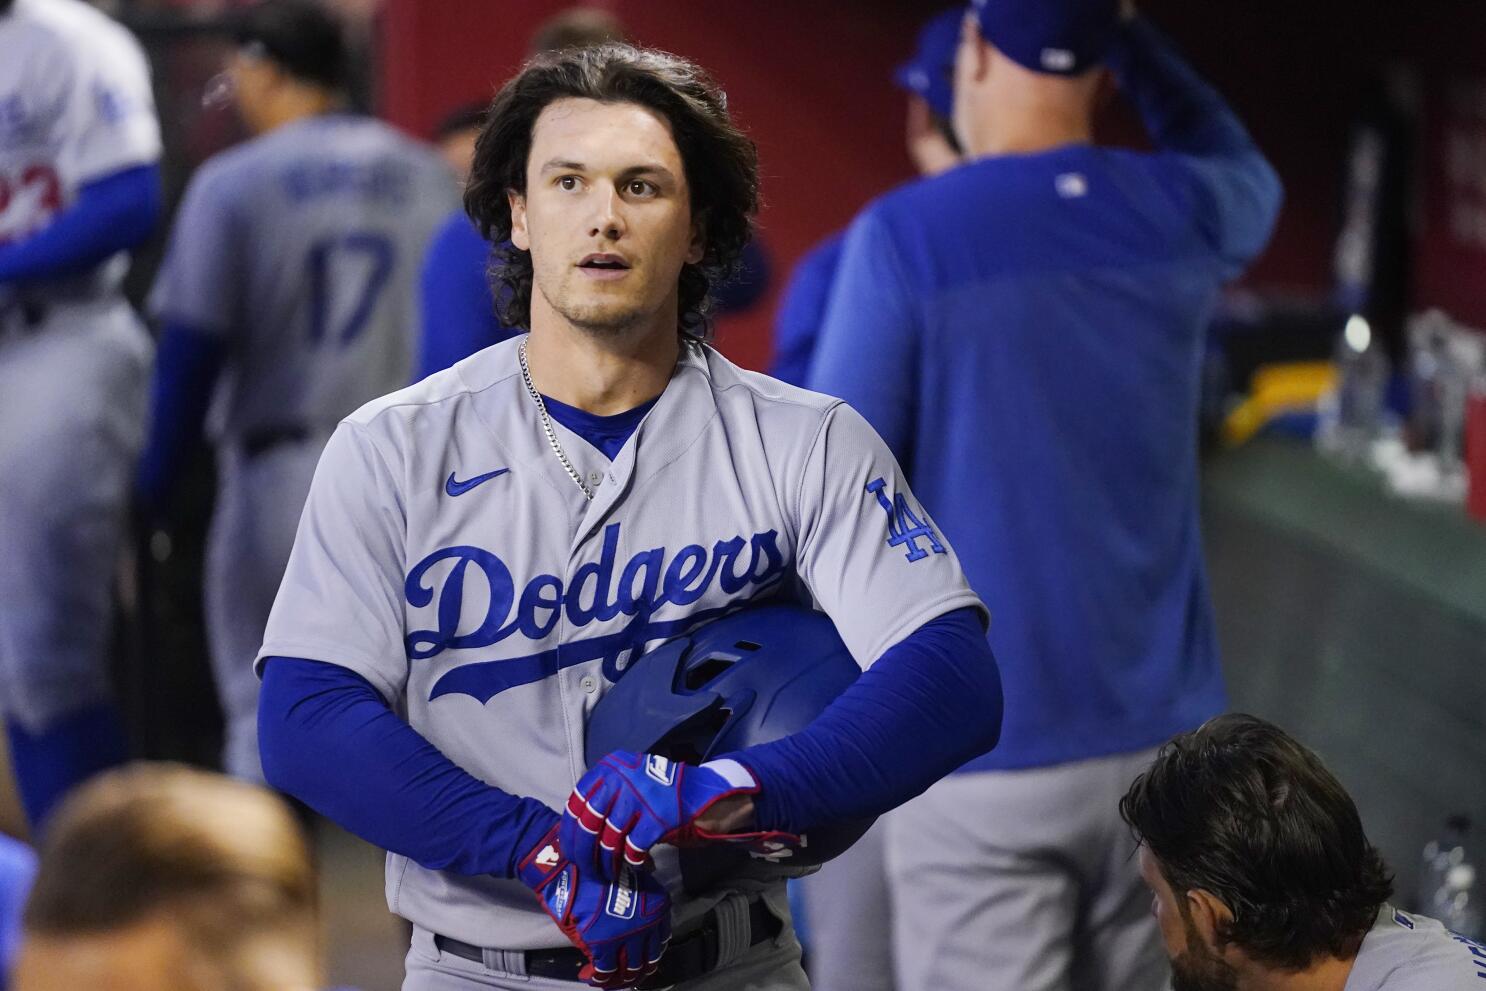 Dispatch From an Alternative Universe: Los Angeles Dodgers To